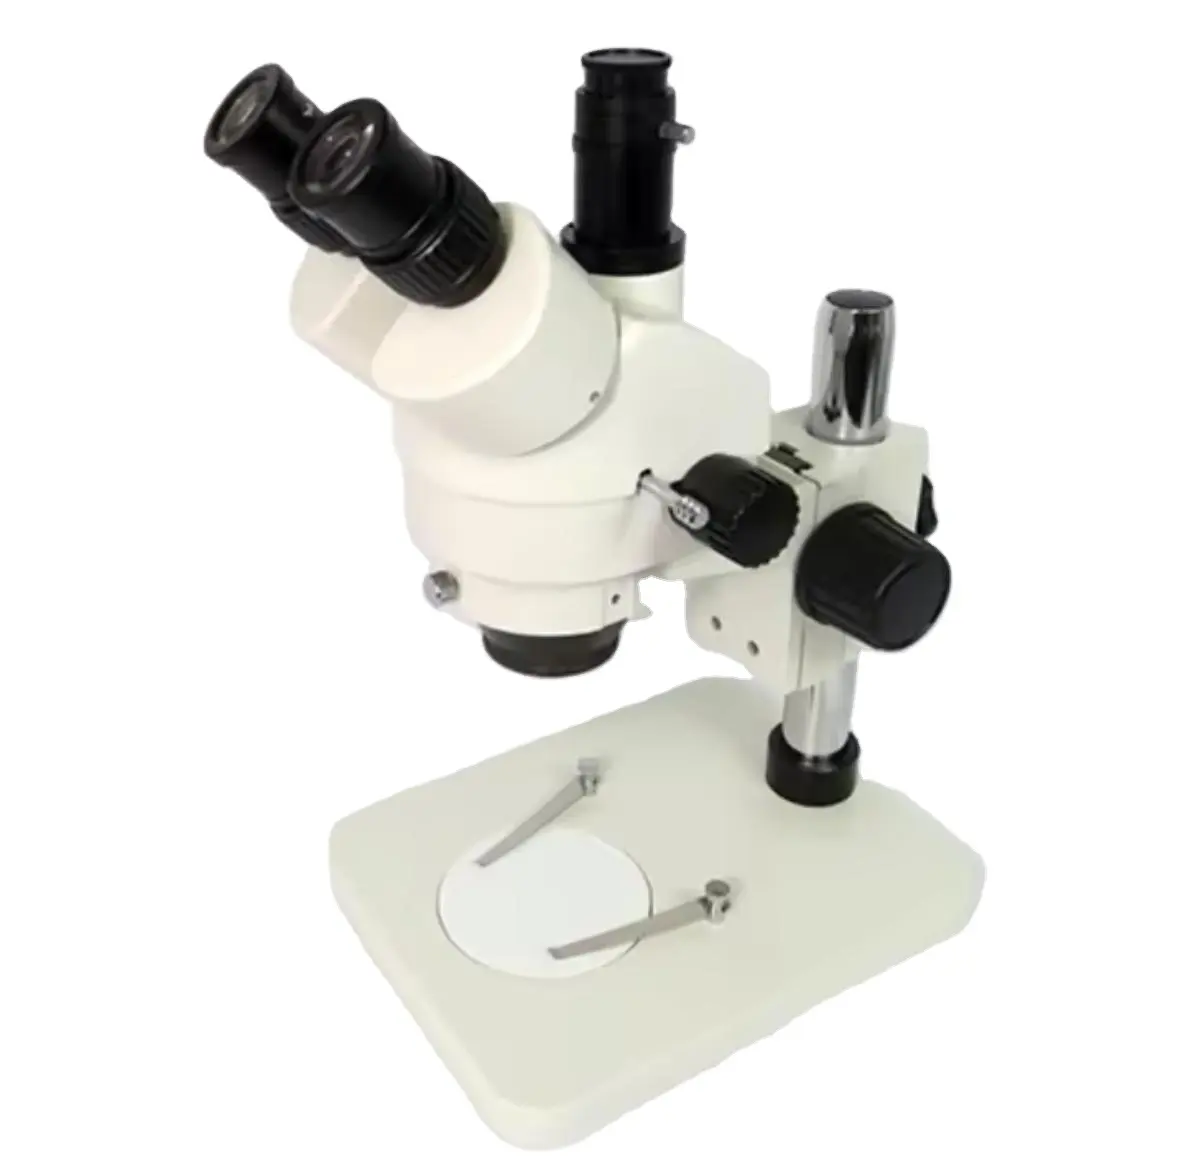 Continuous Zoom Magnification 7X-45X trinocular Stereo Microscope Camera with Autofocus industrial camera